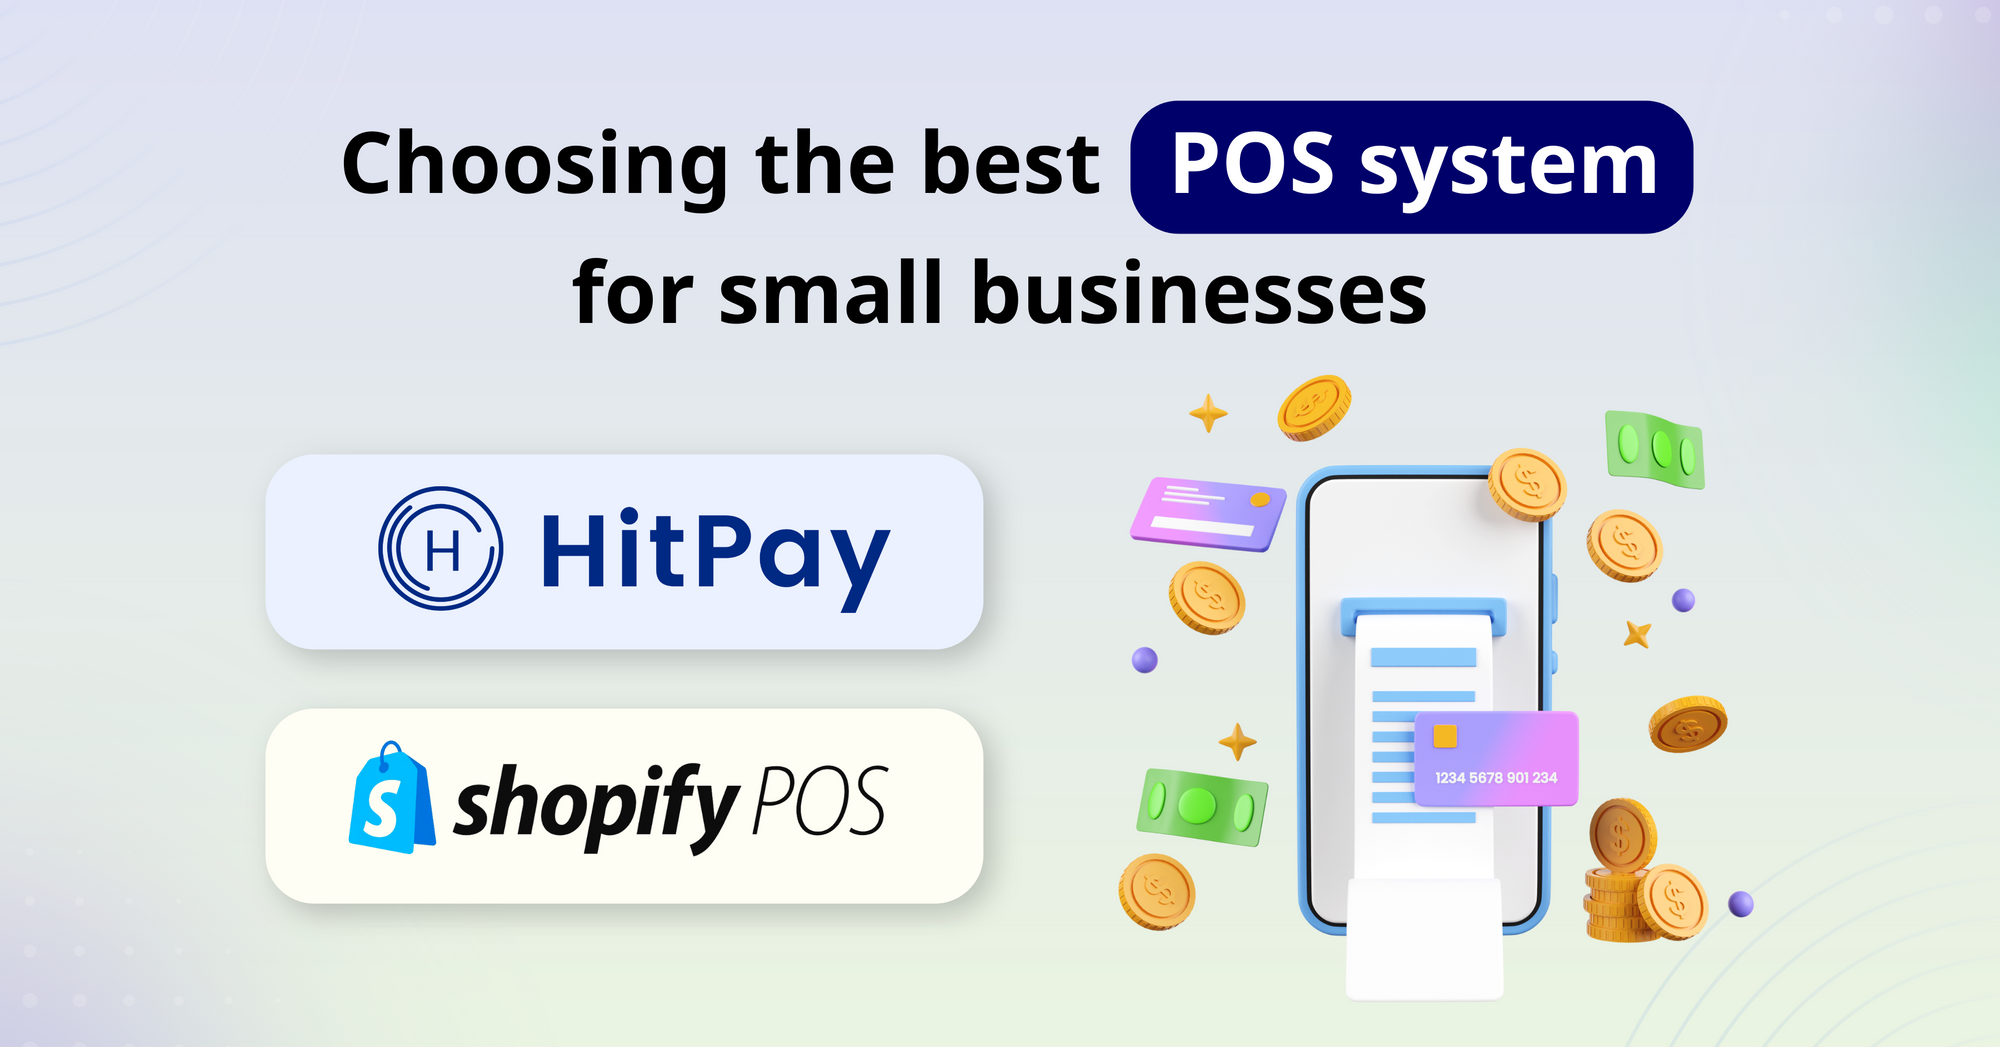 Shopify POS and HitPay review: Comparing the best POS systems for small businesses [2023]